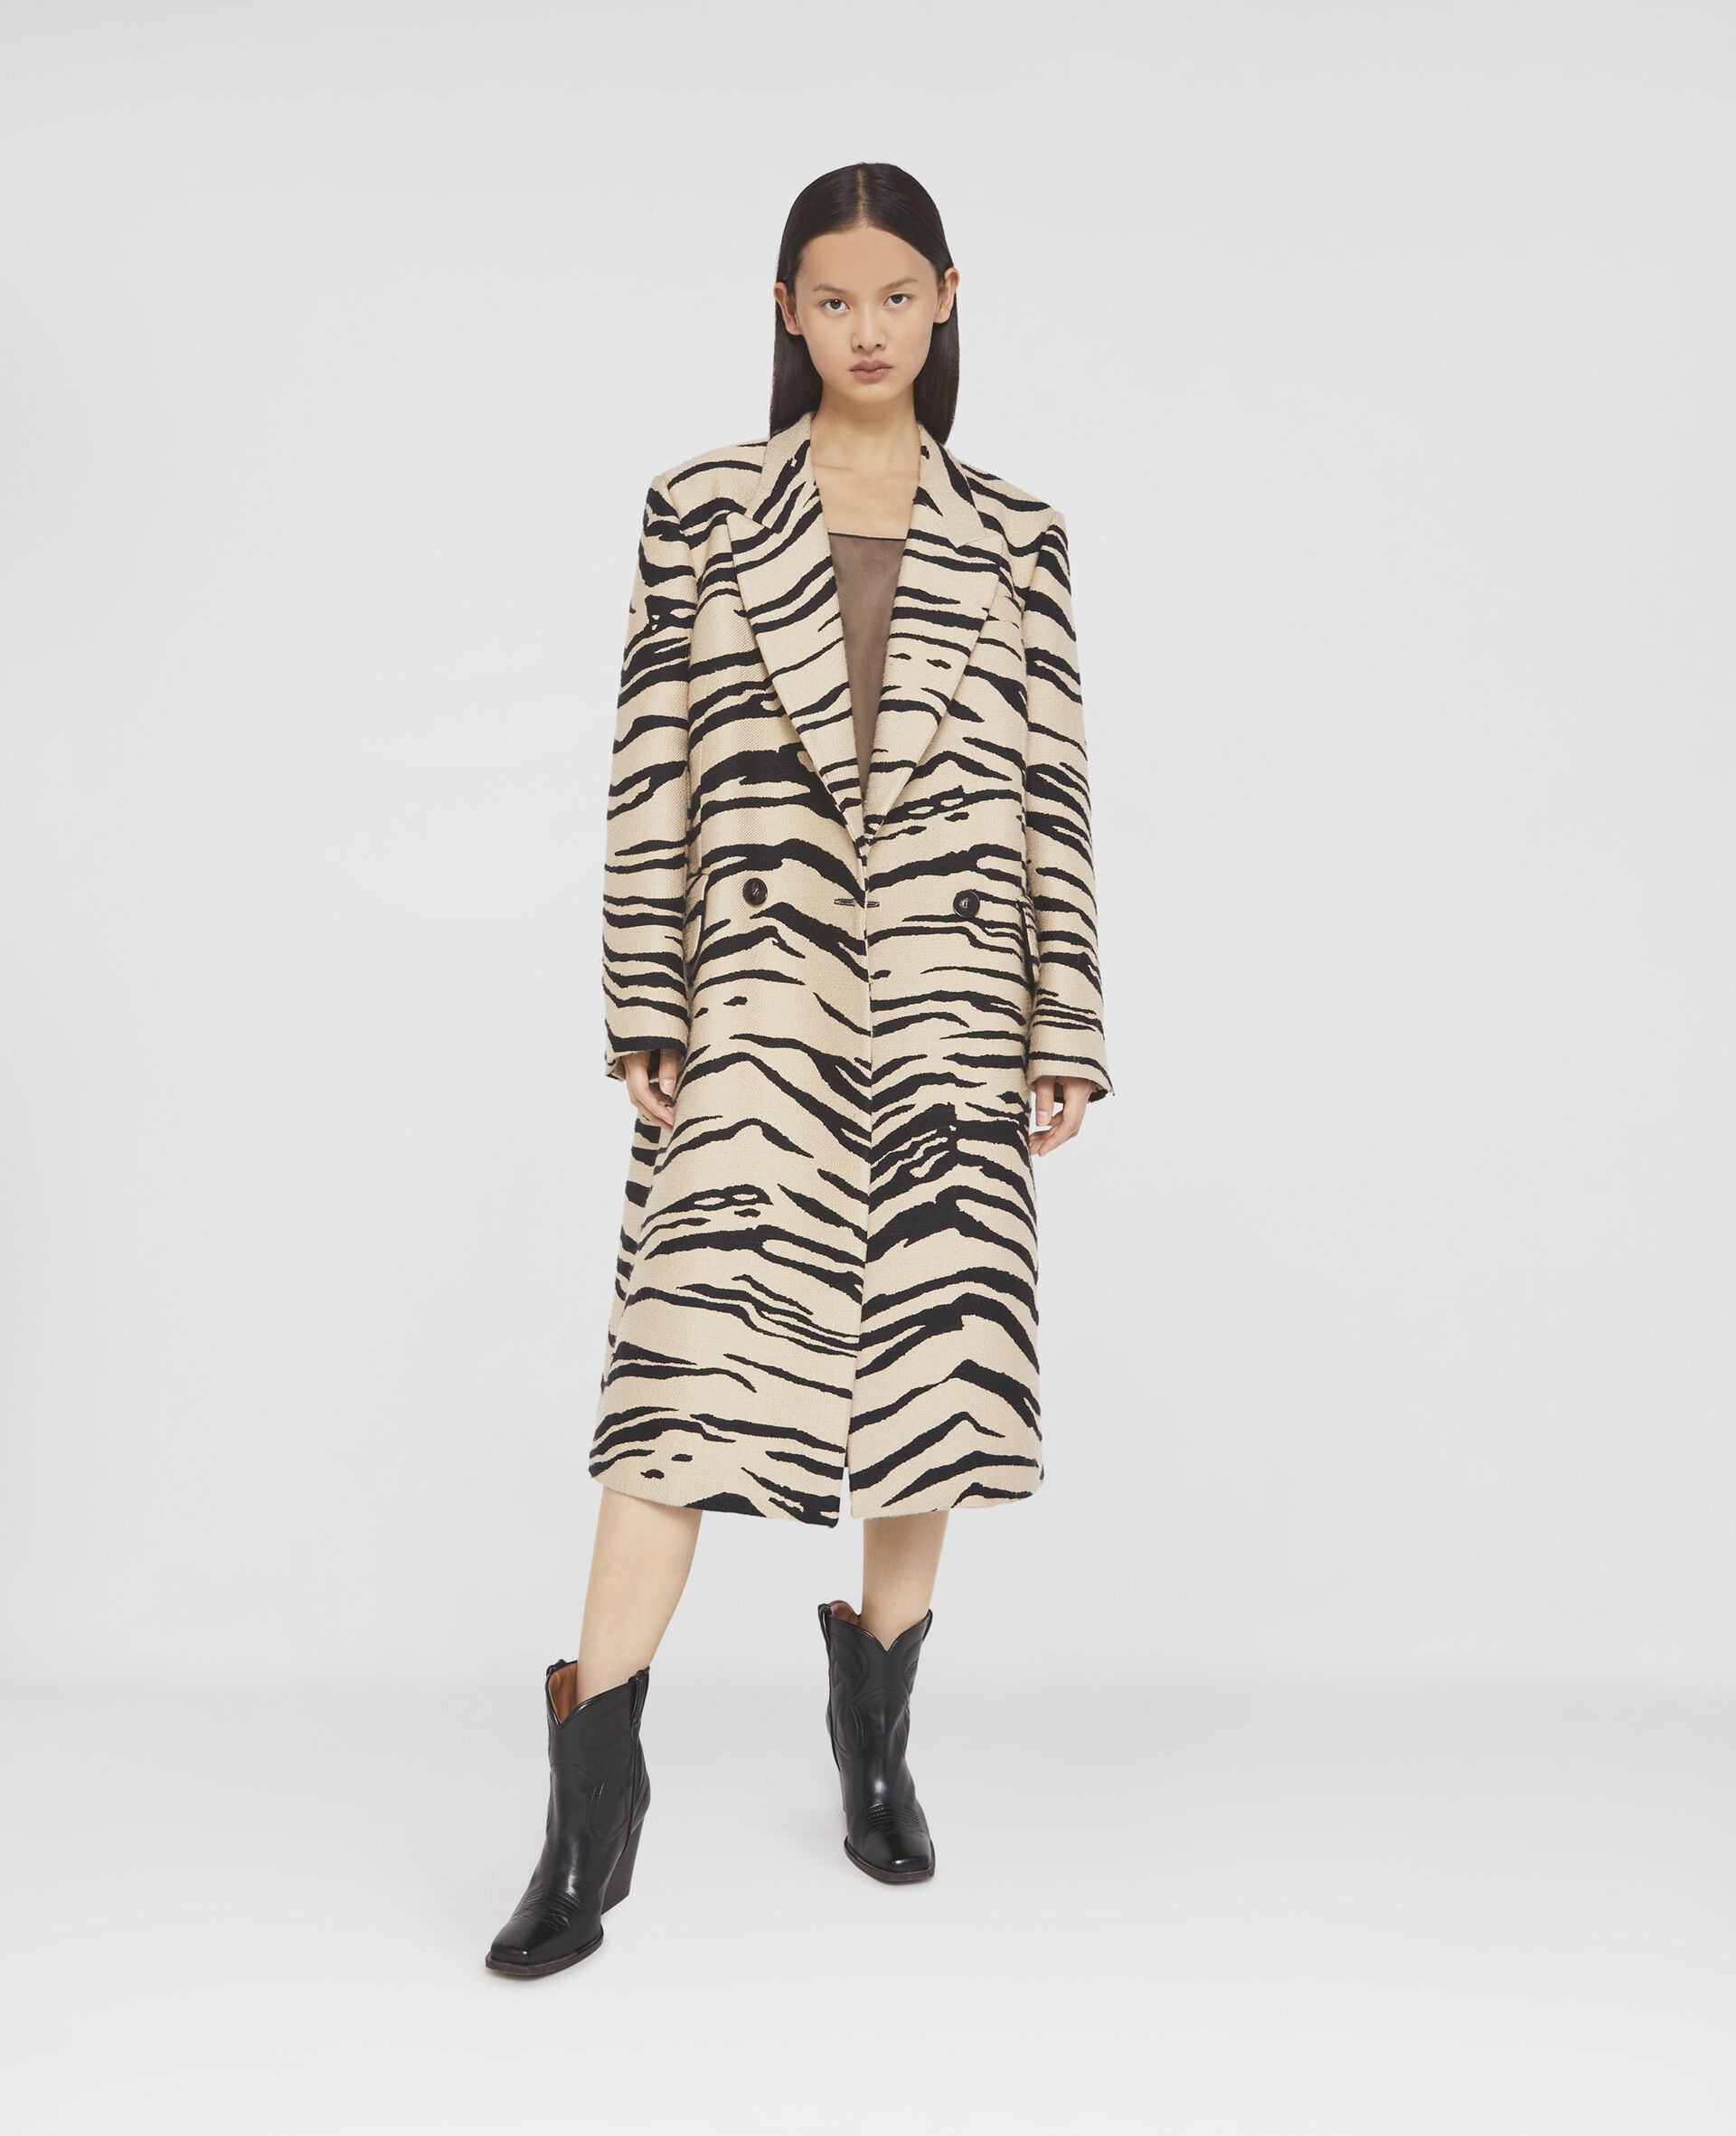 Tiger Print Double-Breasted Coat-Beige-large image number 1